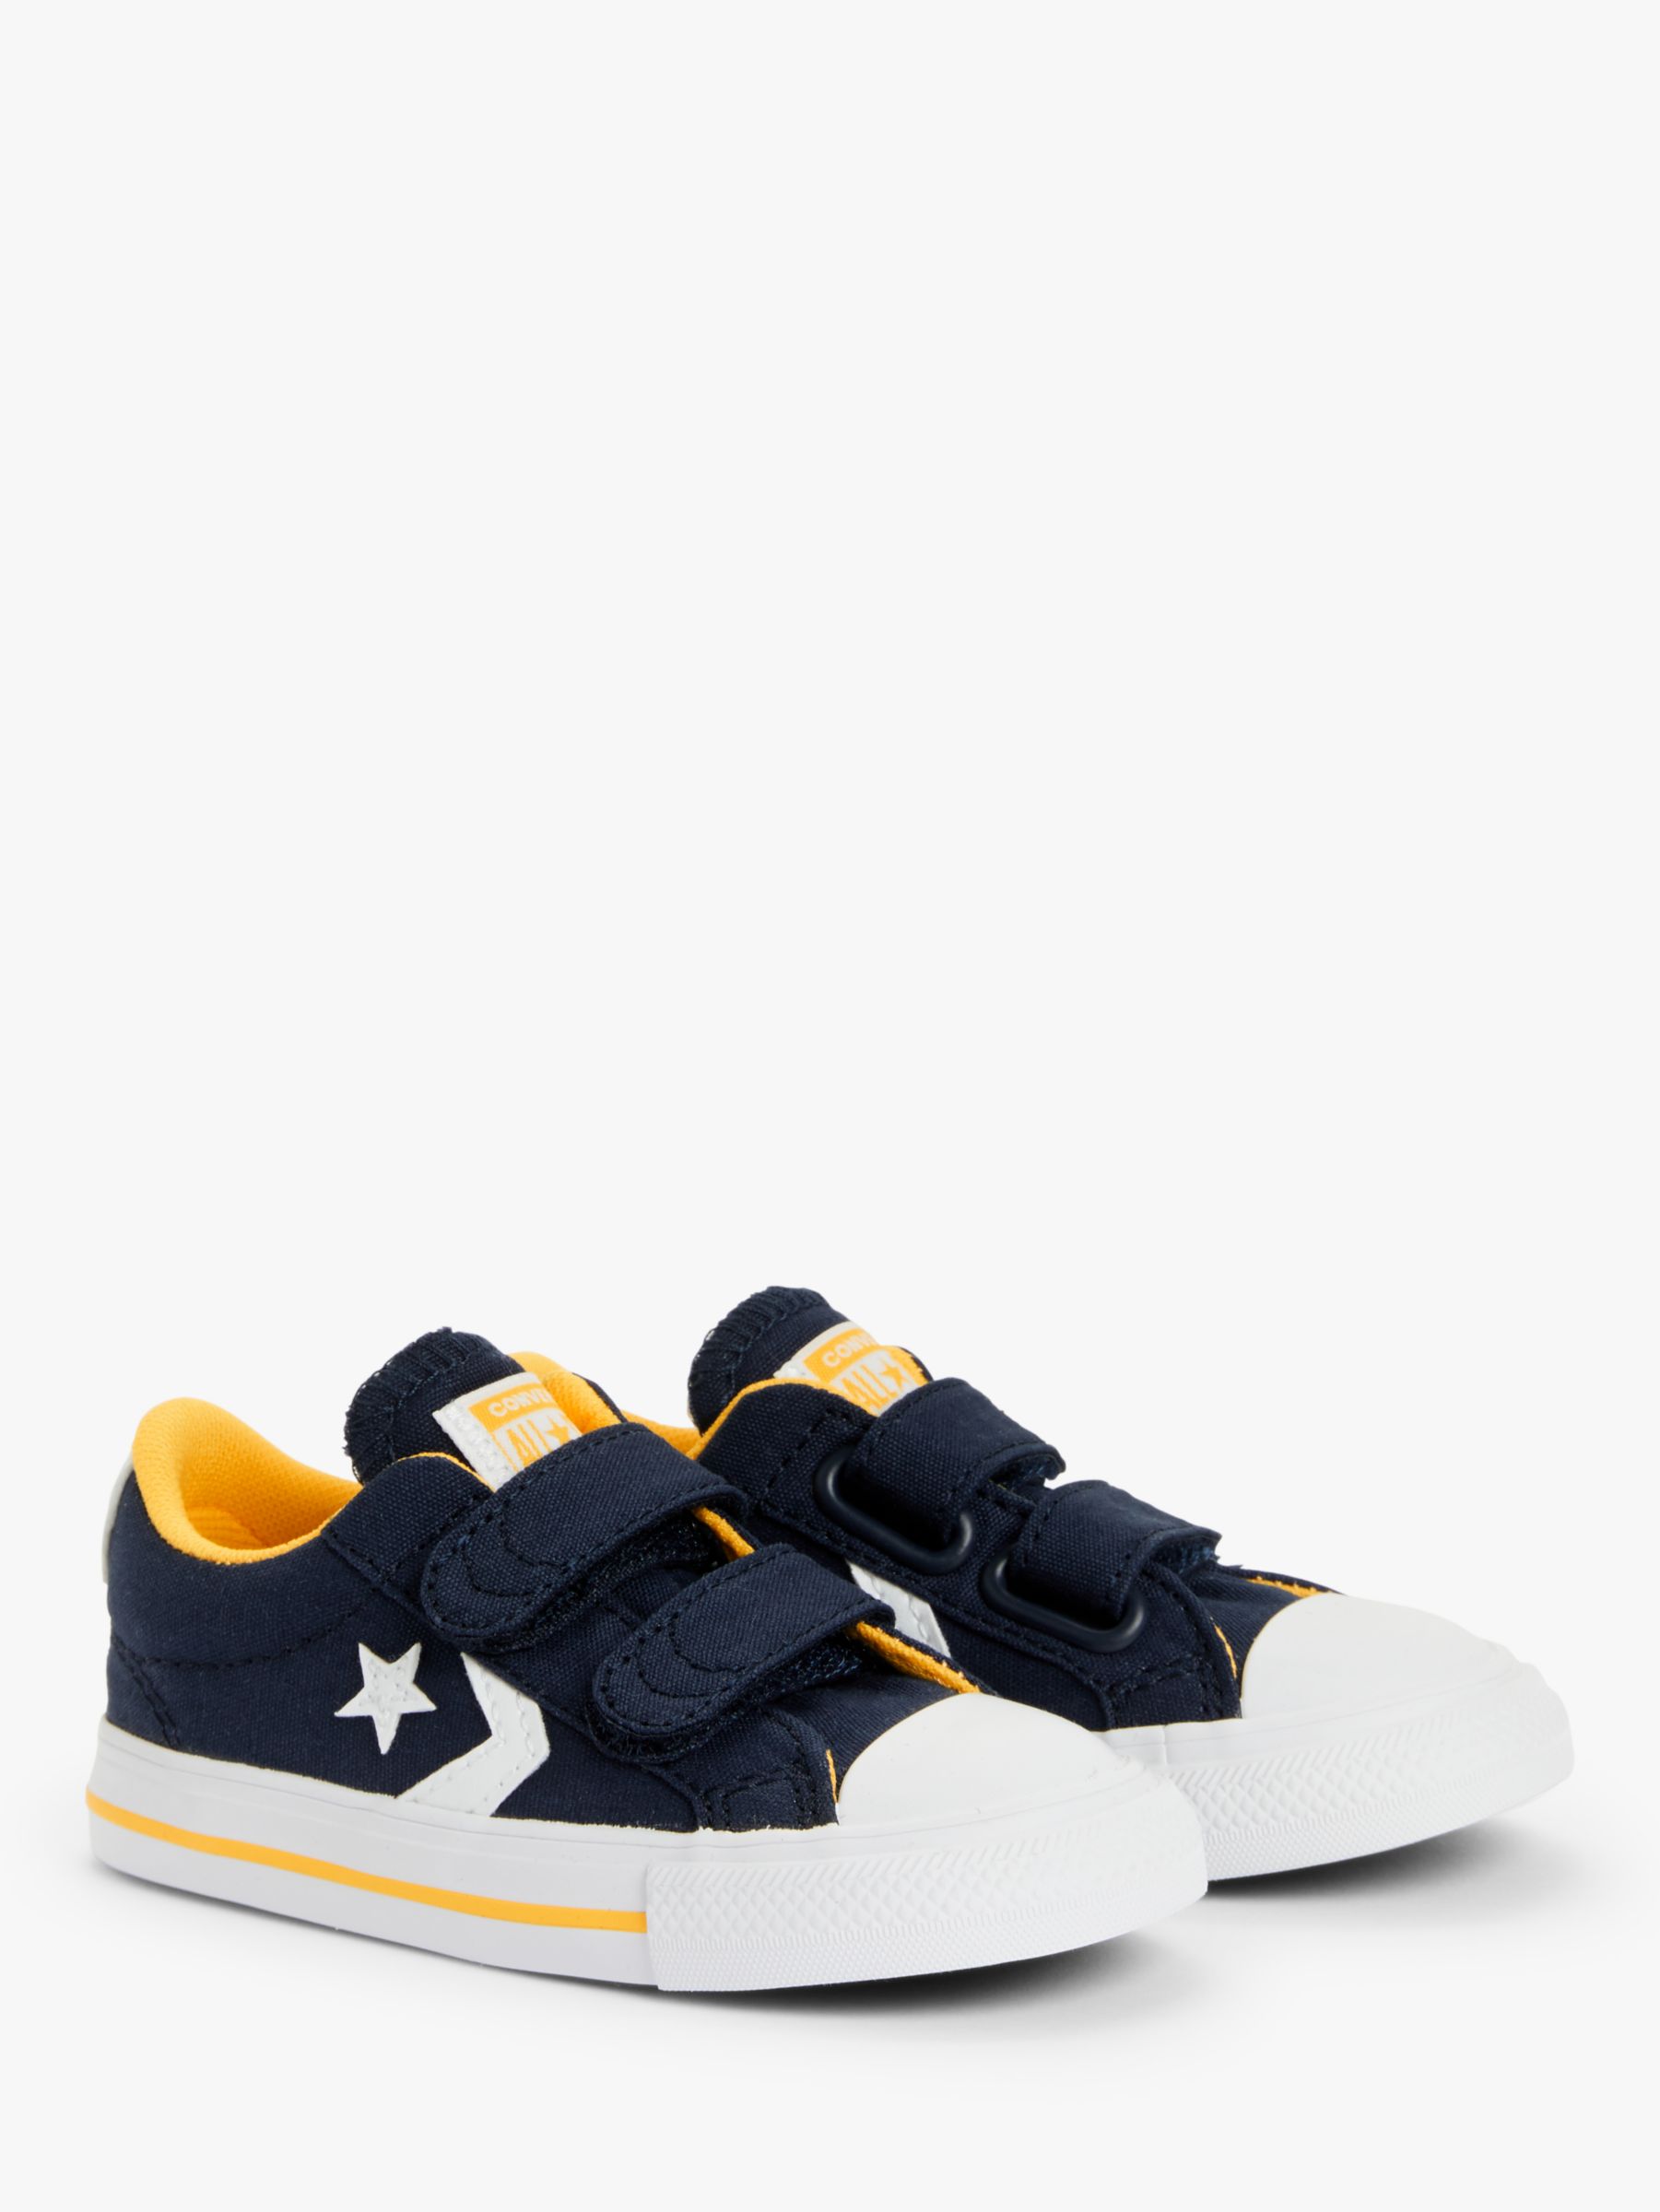 converse all star hi trainers navy yellow festival